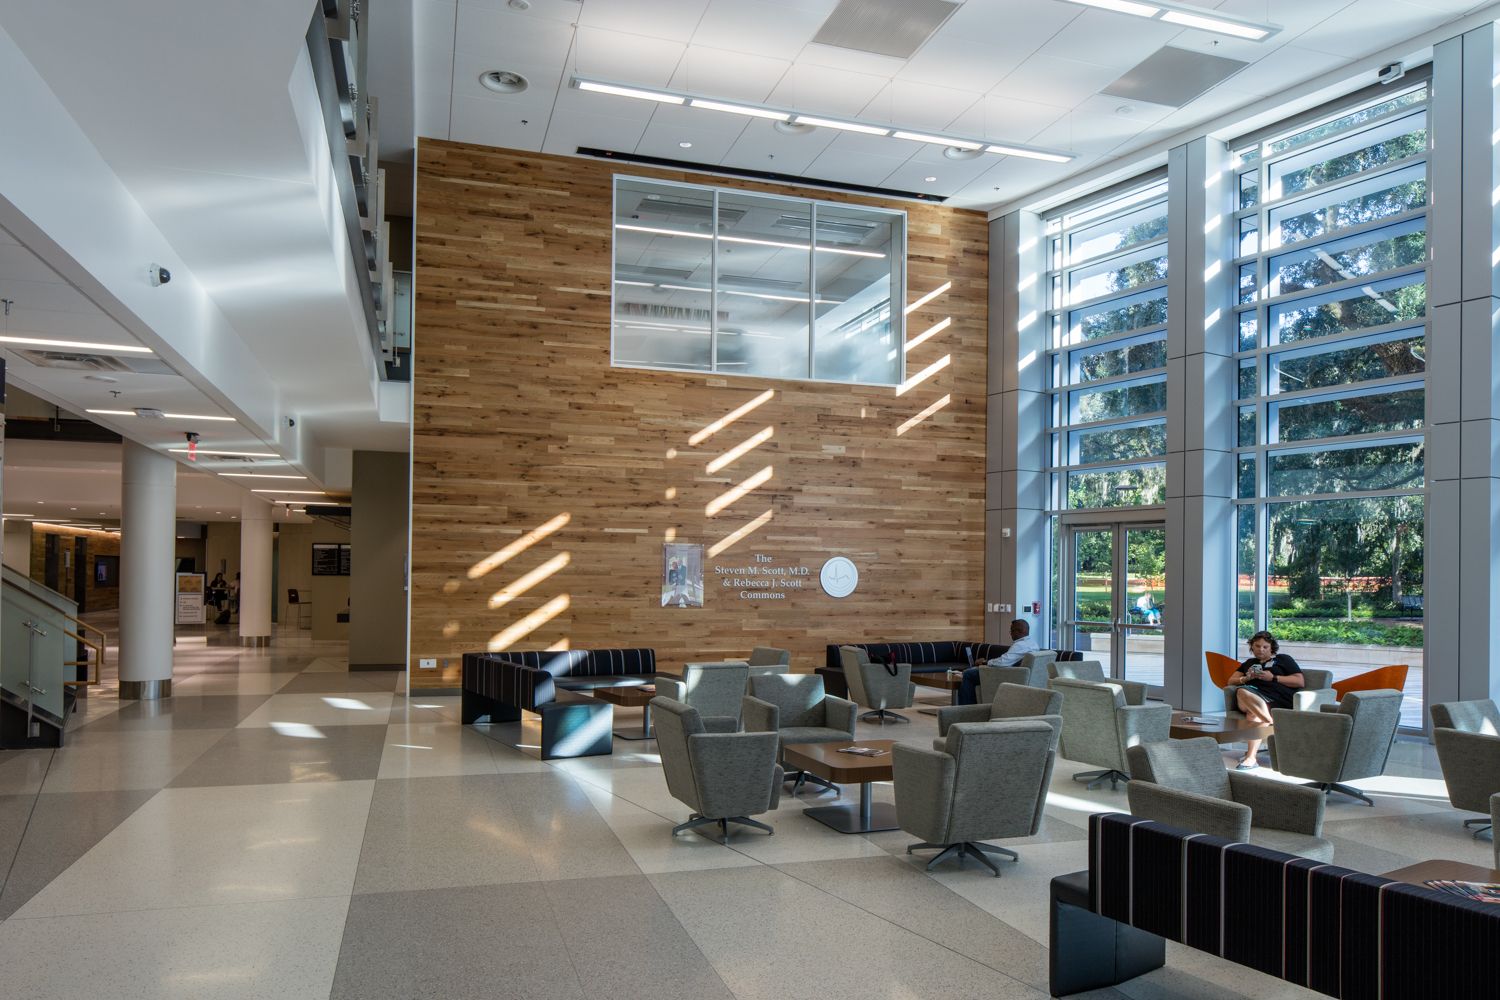 Lounge area in Harrell Medical education building at University of Florida